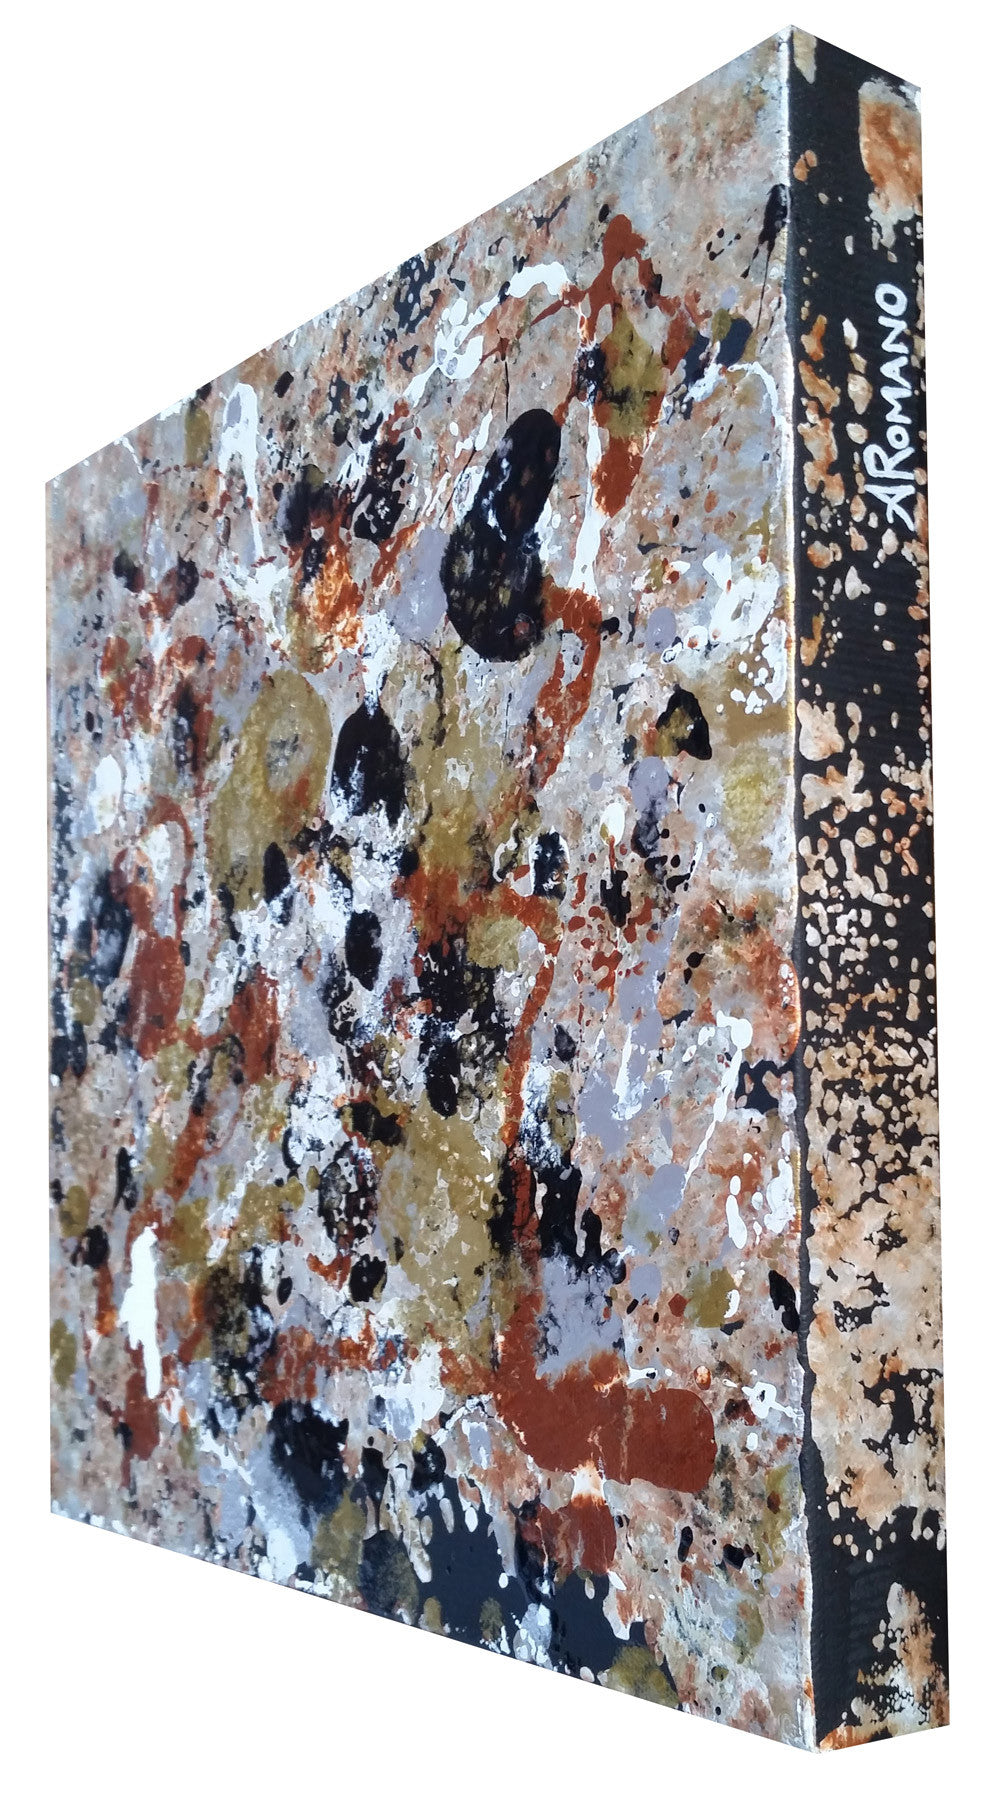 Fluid Painting Mixed Media Metallic Colours Modern Art Gold Silver Copper White Black